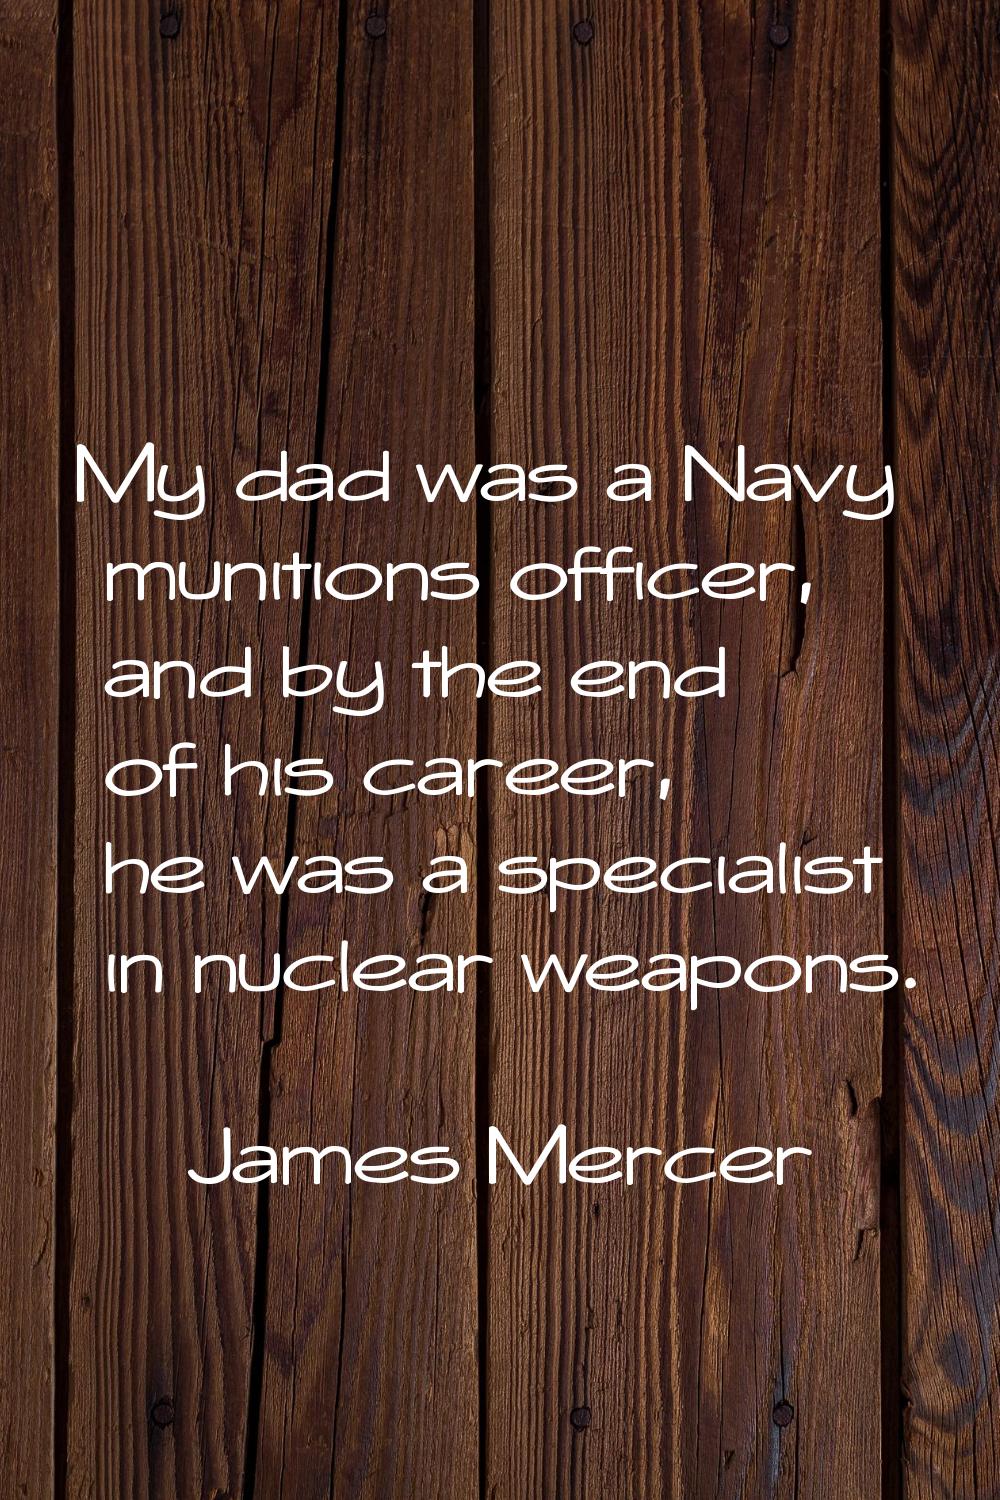 My dad was a Navy munitions officer, and by the end of his career, he was a specialist in nuclear w